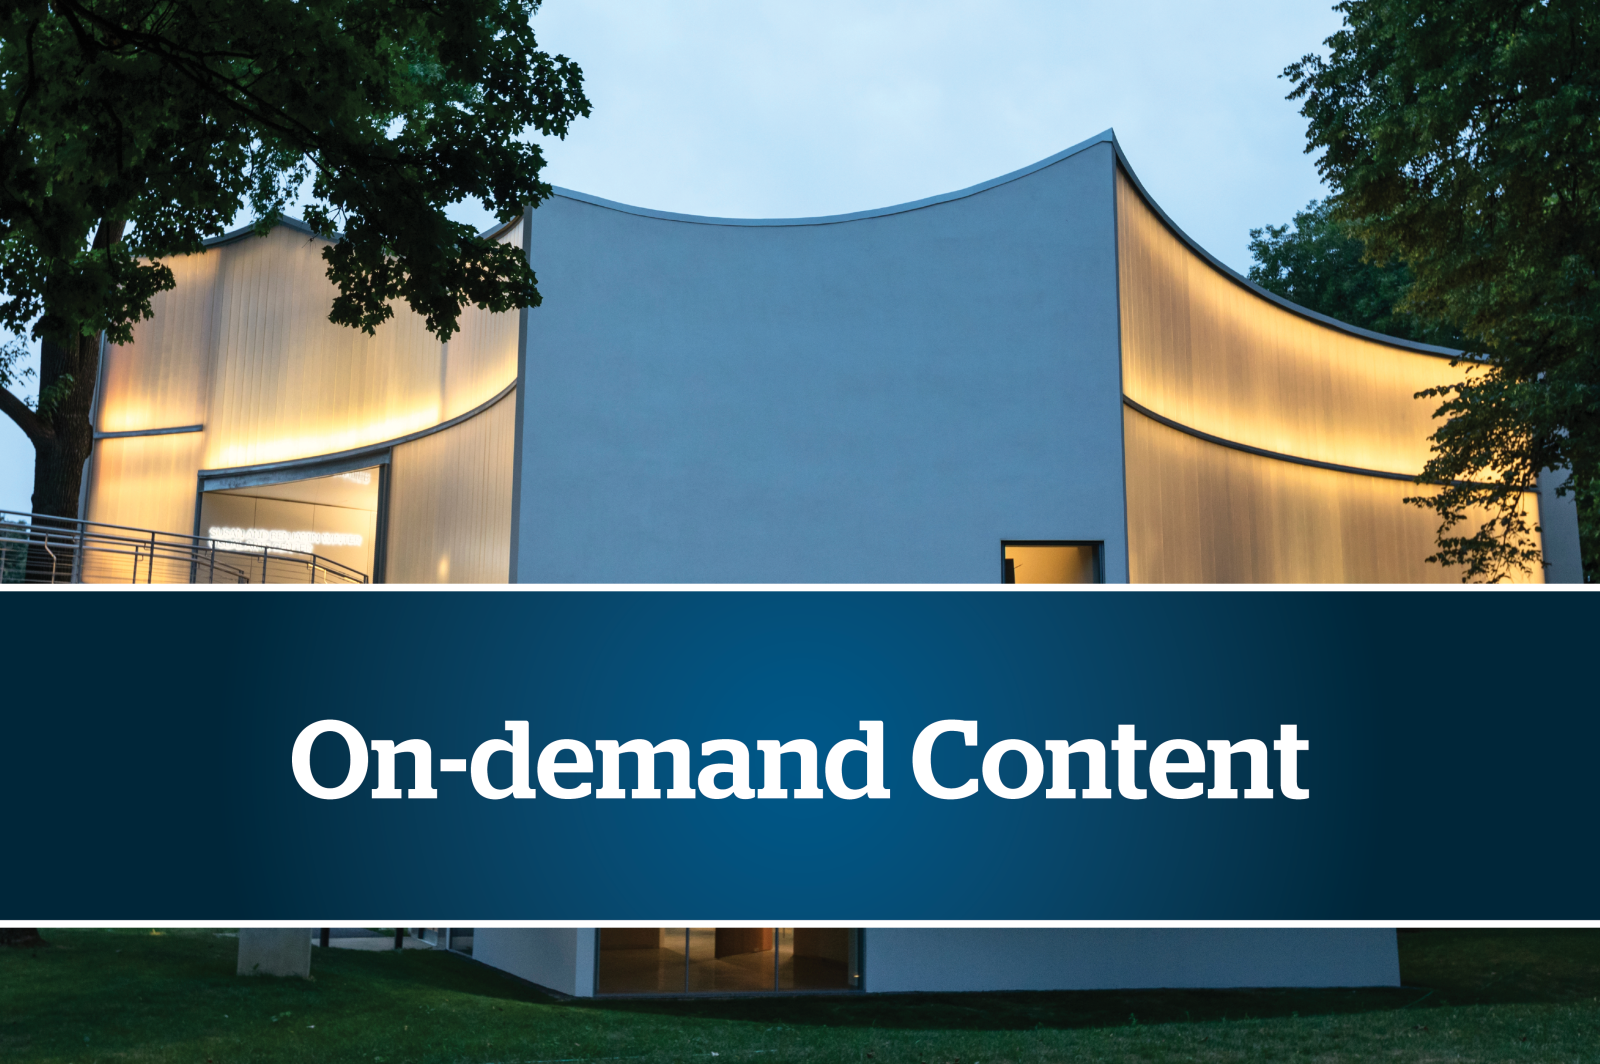 On-demand Content